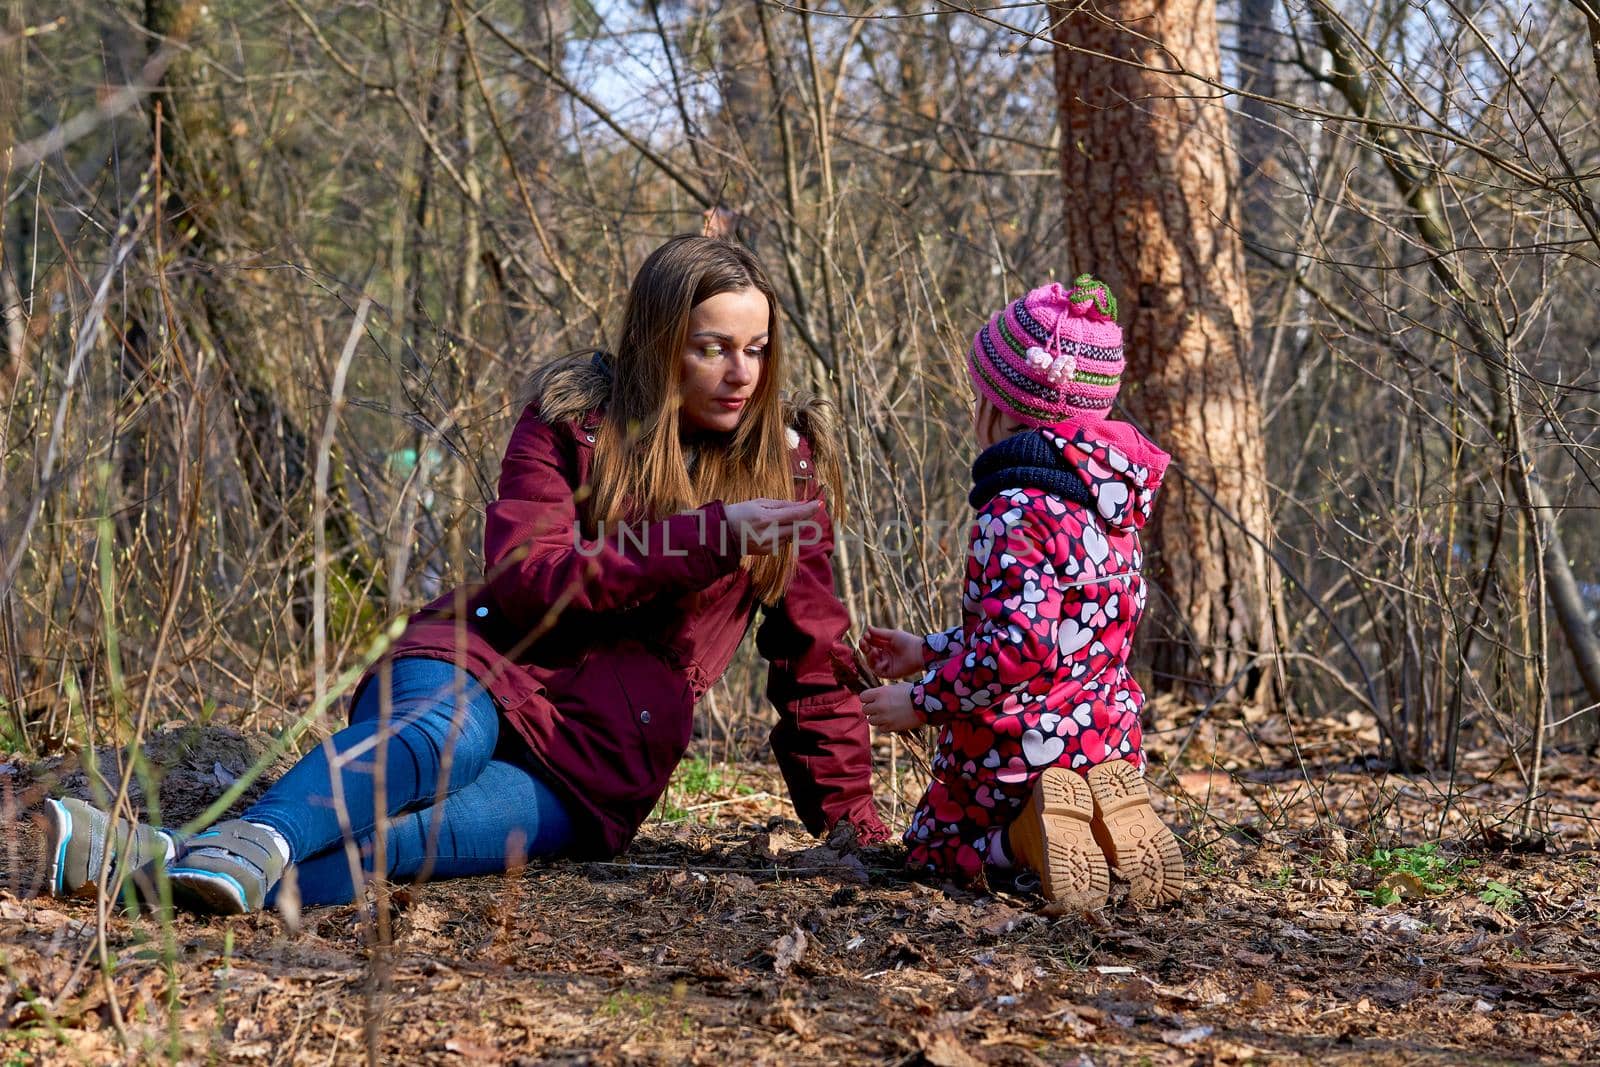 the process of receiving or giving systematic instruction, especially at a school or university. A young mother tells the child about the secrets and phenomena of nature in the spring autumn forest